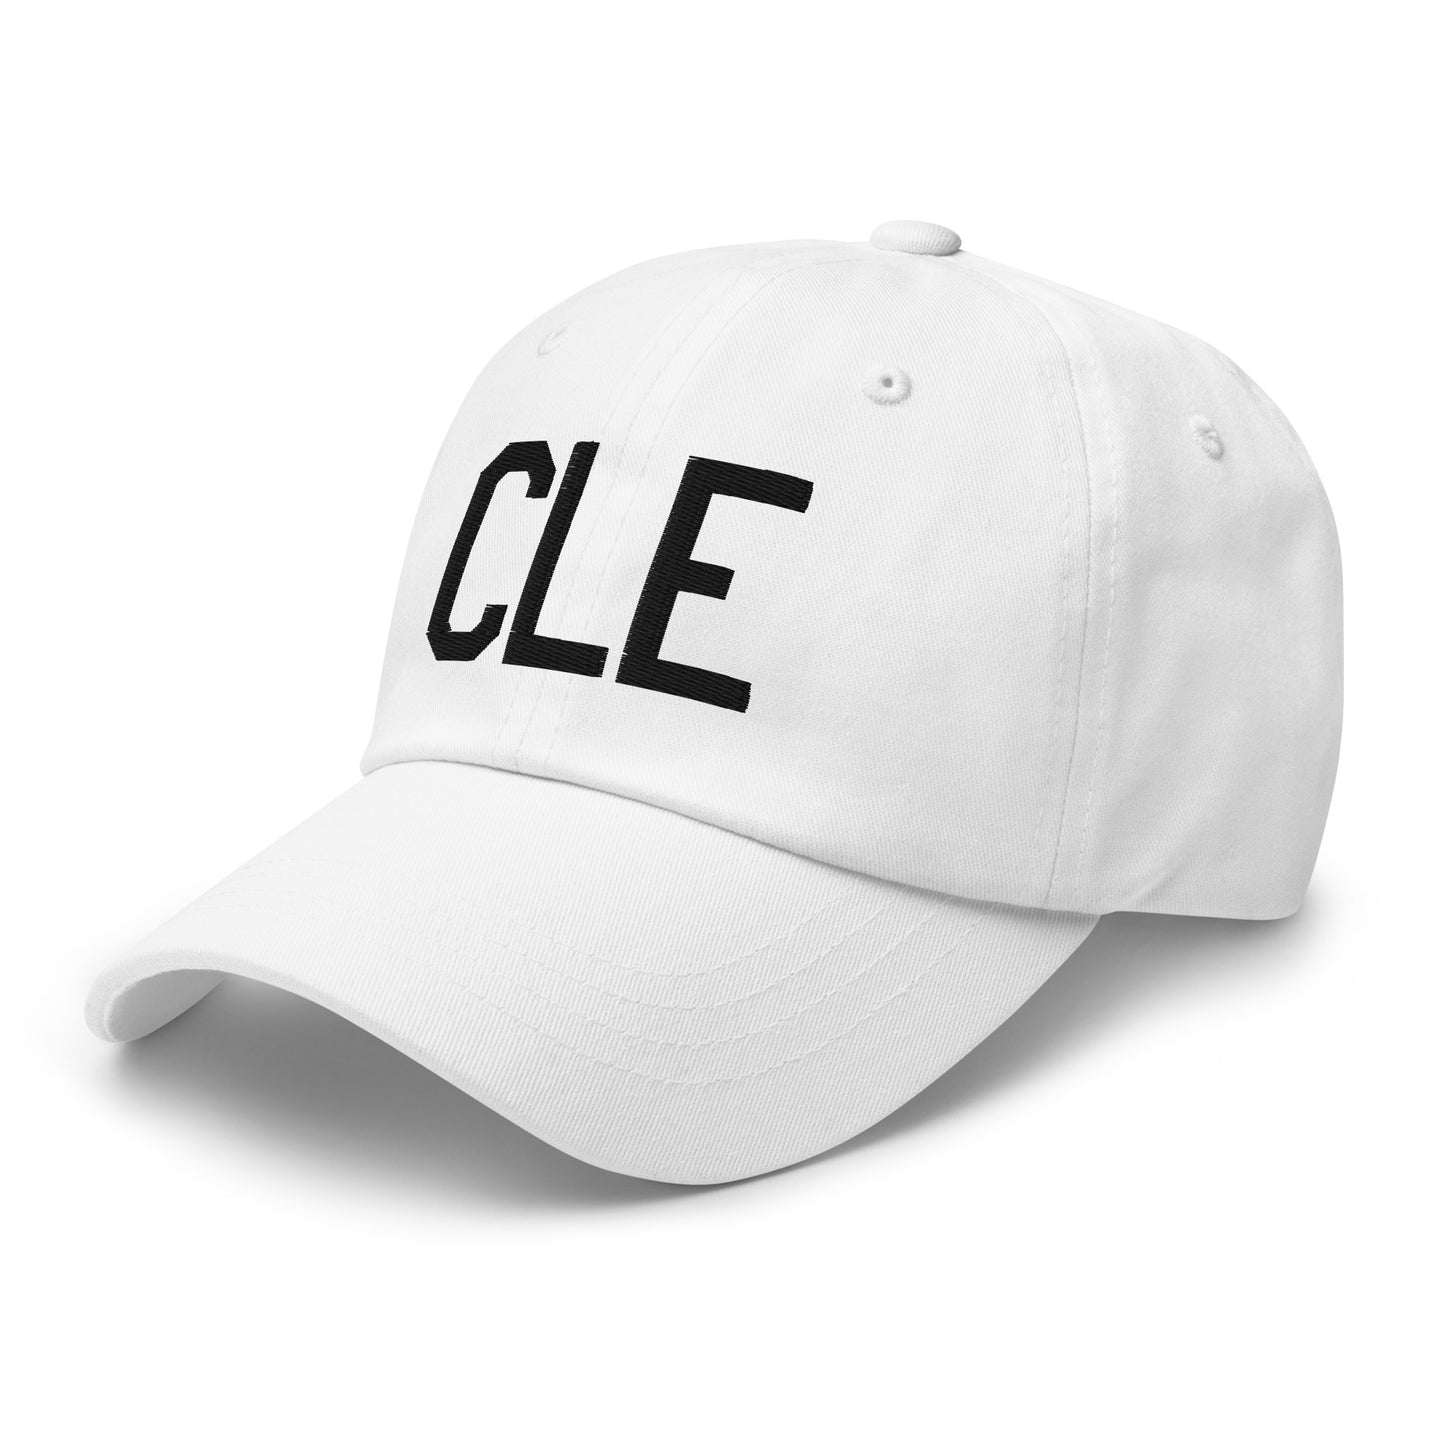 Airport Code Baseball Cap - Black • CLE Cleveland • YHM Designs - Image 20